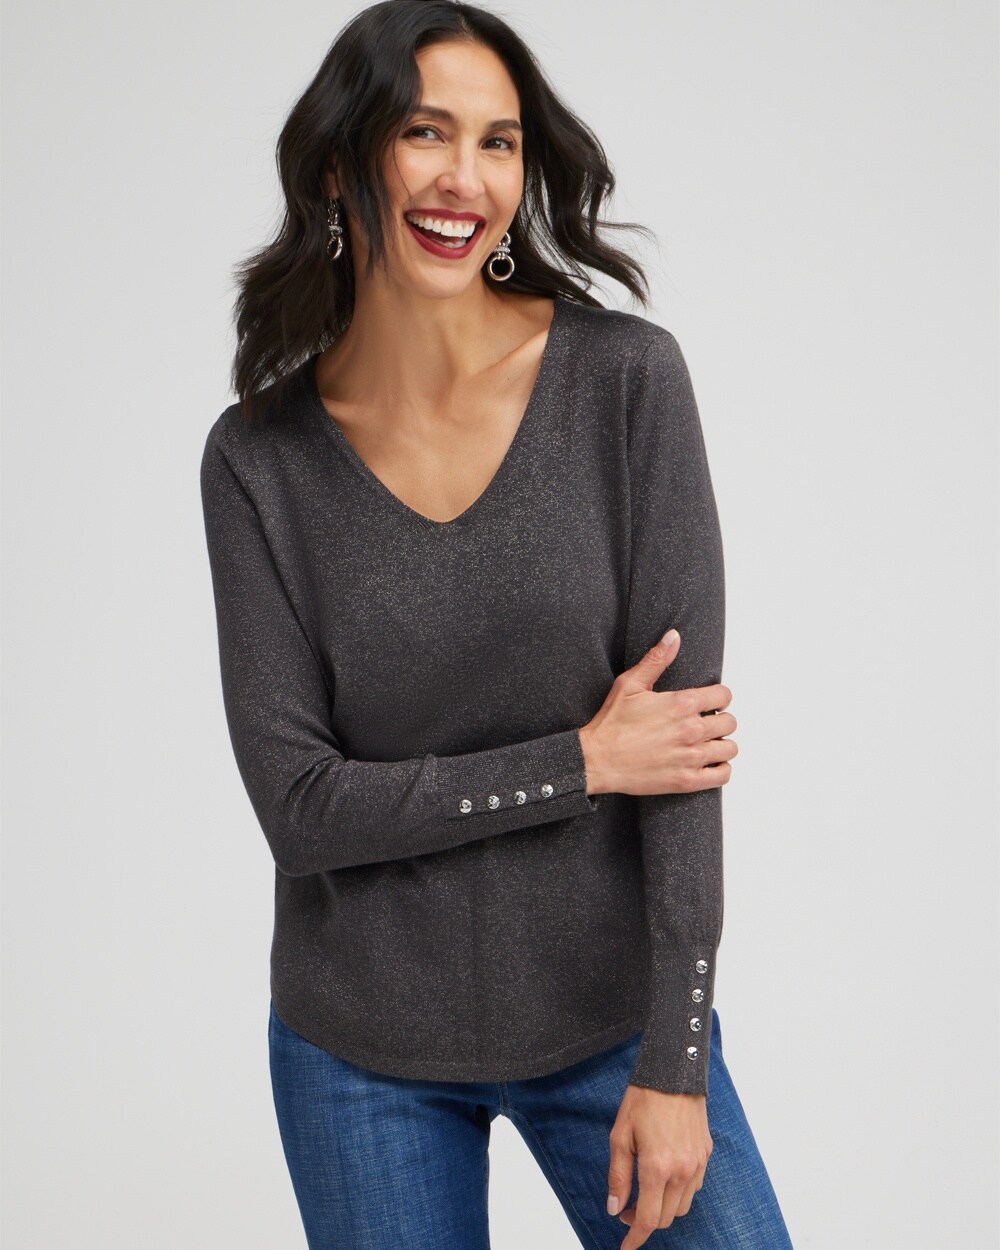 Spun Rayon Lurex V-neck Sweater video preview image, click to start video